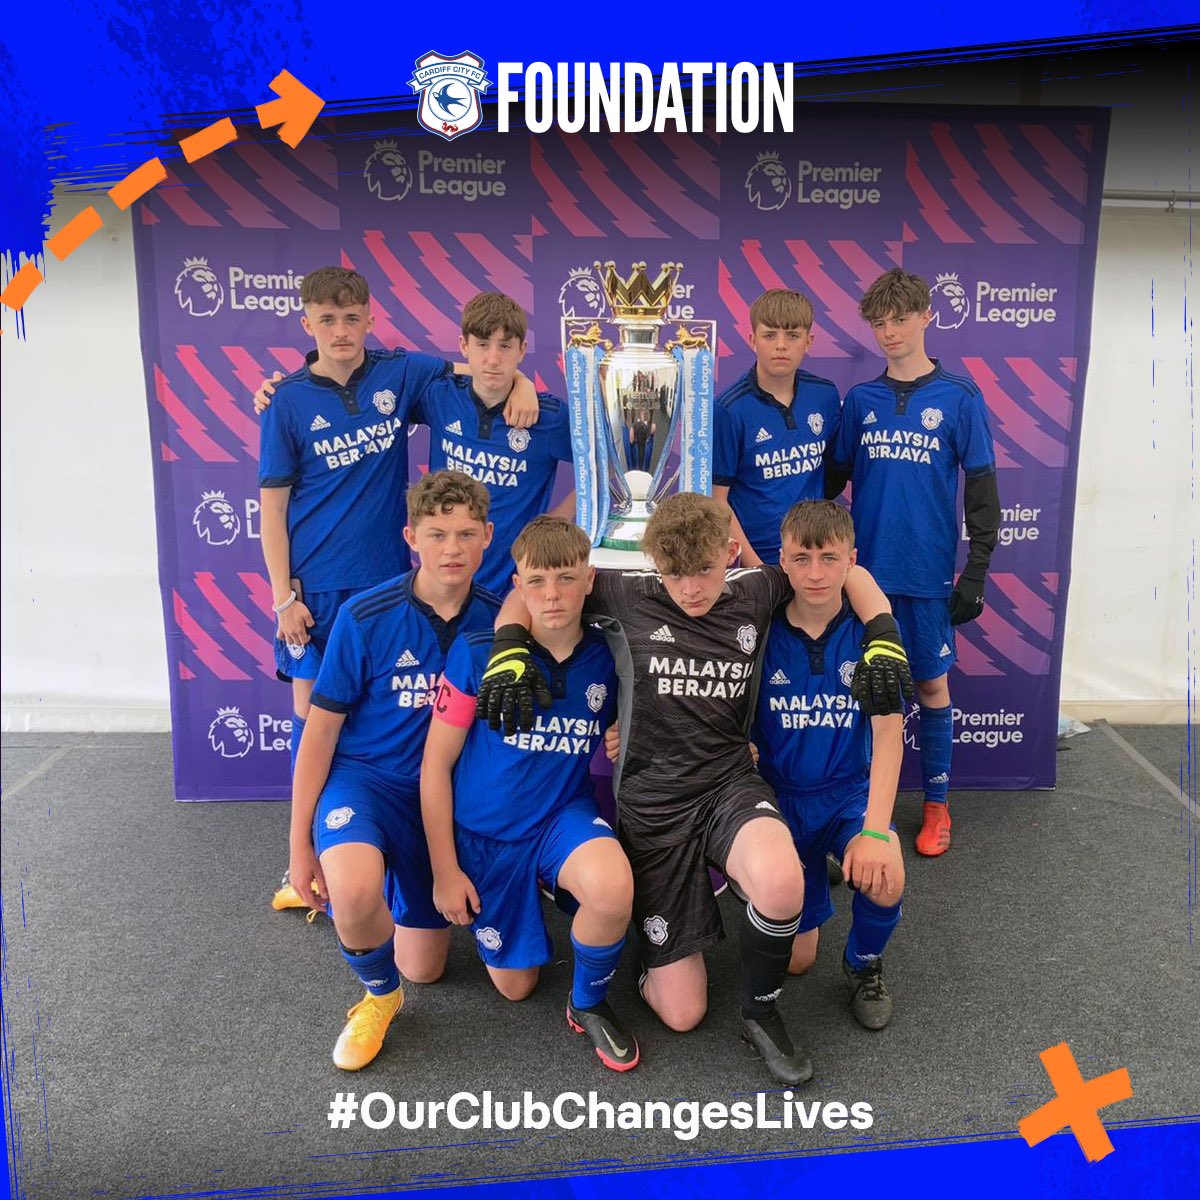 🚨 Vacancy 🚨 We are looking for applicants to work in our @CCFC_Foundation Youth Outreach programmes. We are seeking applicants to work in the areas of: Cardiff, Vale of Glam, Bridgend, Blaenau Gwent, Merthyr & Rhondda Cynon Taf. #YouthWork #Coaching cardiffcityfcfoundation.org.uk/who-we-are/wor…